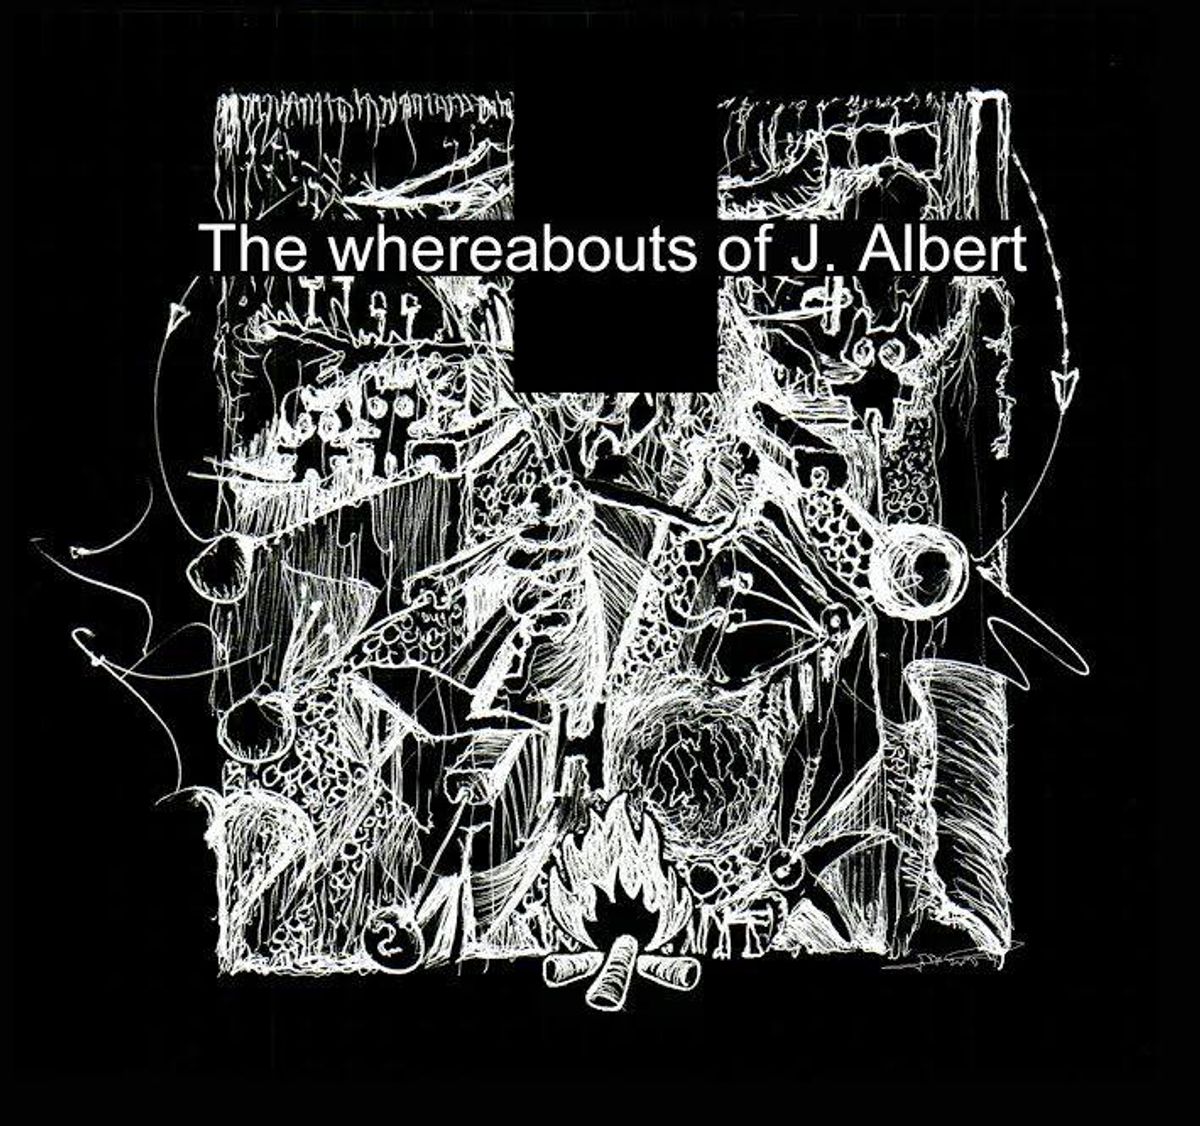 The Whereabouts of J. Albert